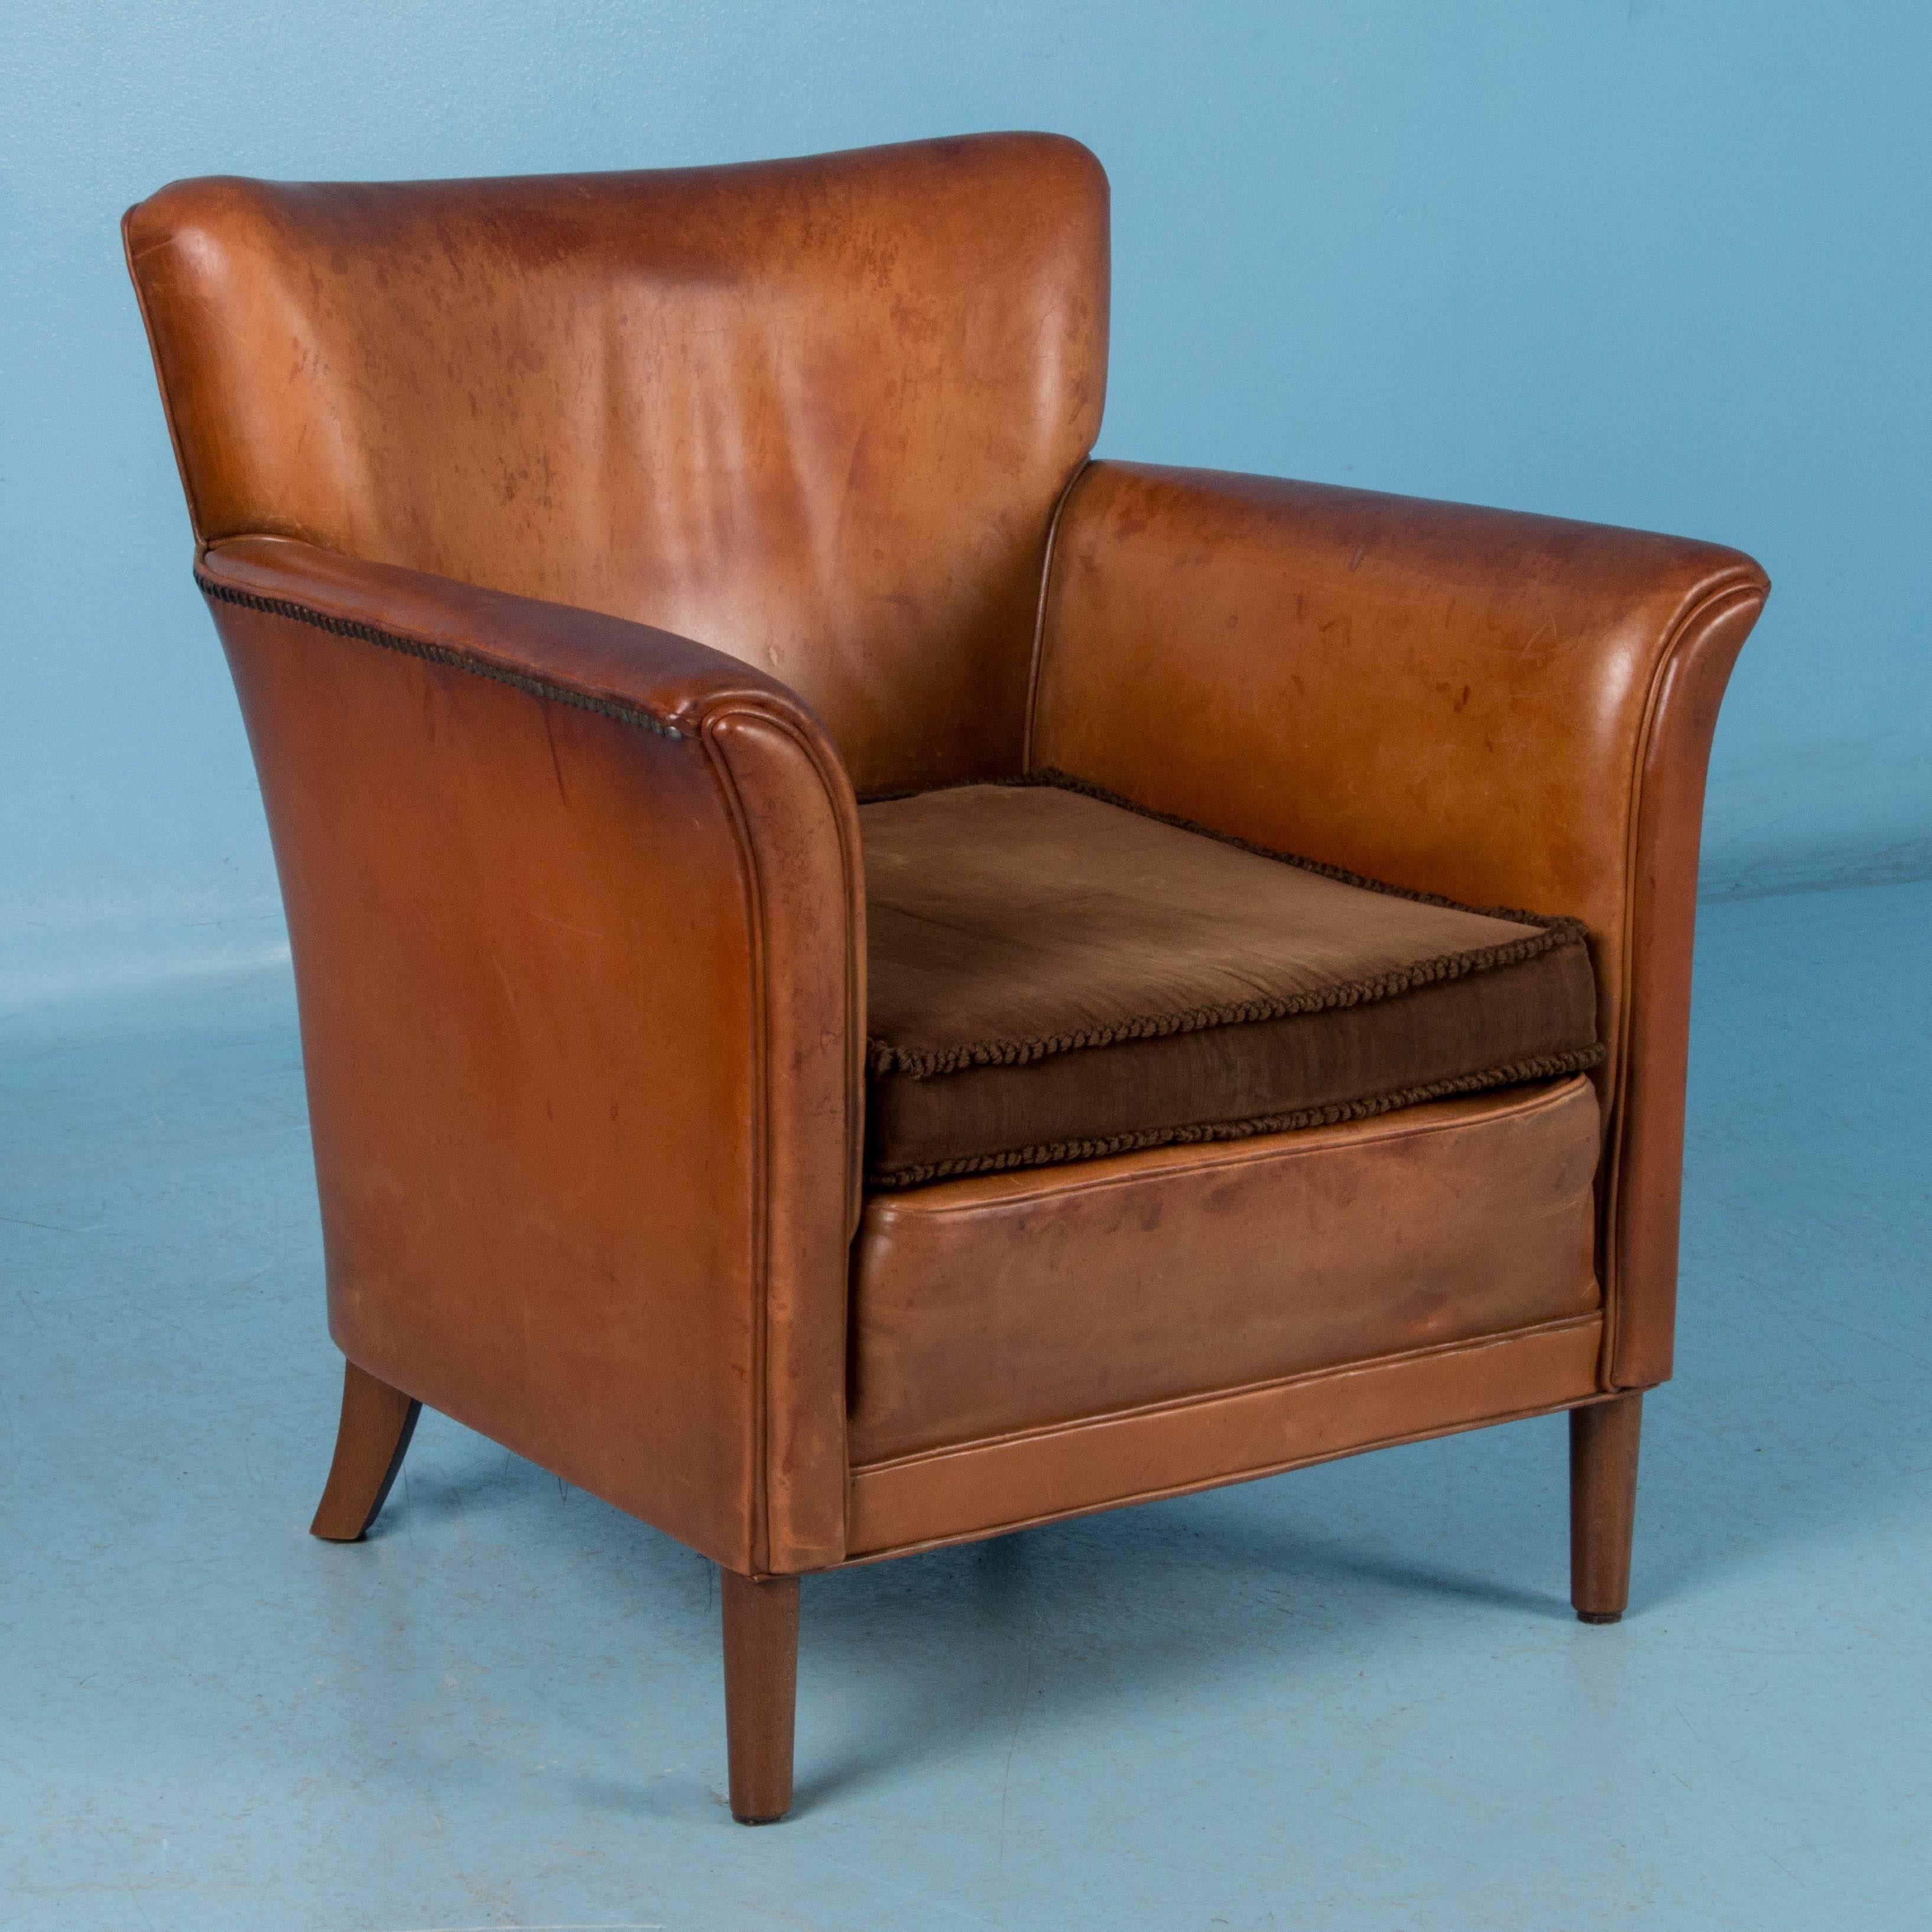 This pair of early 20th century leather club chairs from Denmark have a square removable cushion and both are upholstered with decorative brass tacks. The wing backs of both chairs create a slight curve for more comfort and the arms are slightly